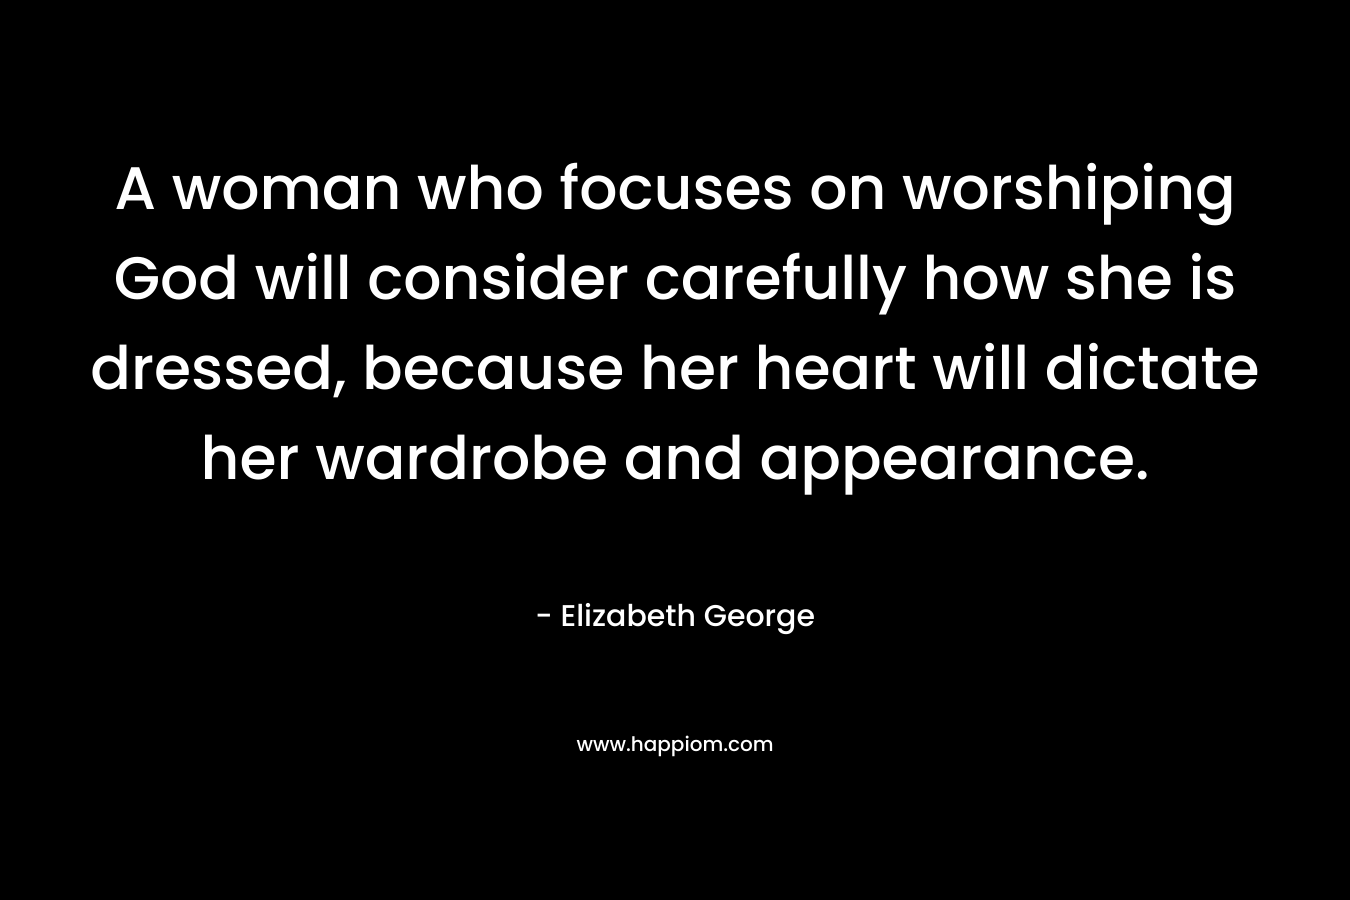 A woman who focuses on worshiping God will consider carefully how she is dressed, because her heart will dictate her wardrobe and appearance. – Elizabeth George